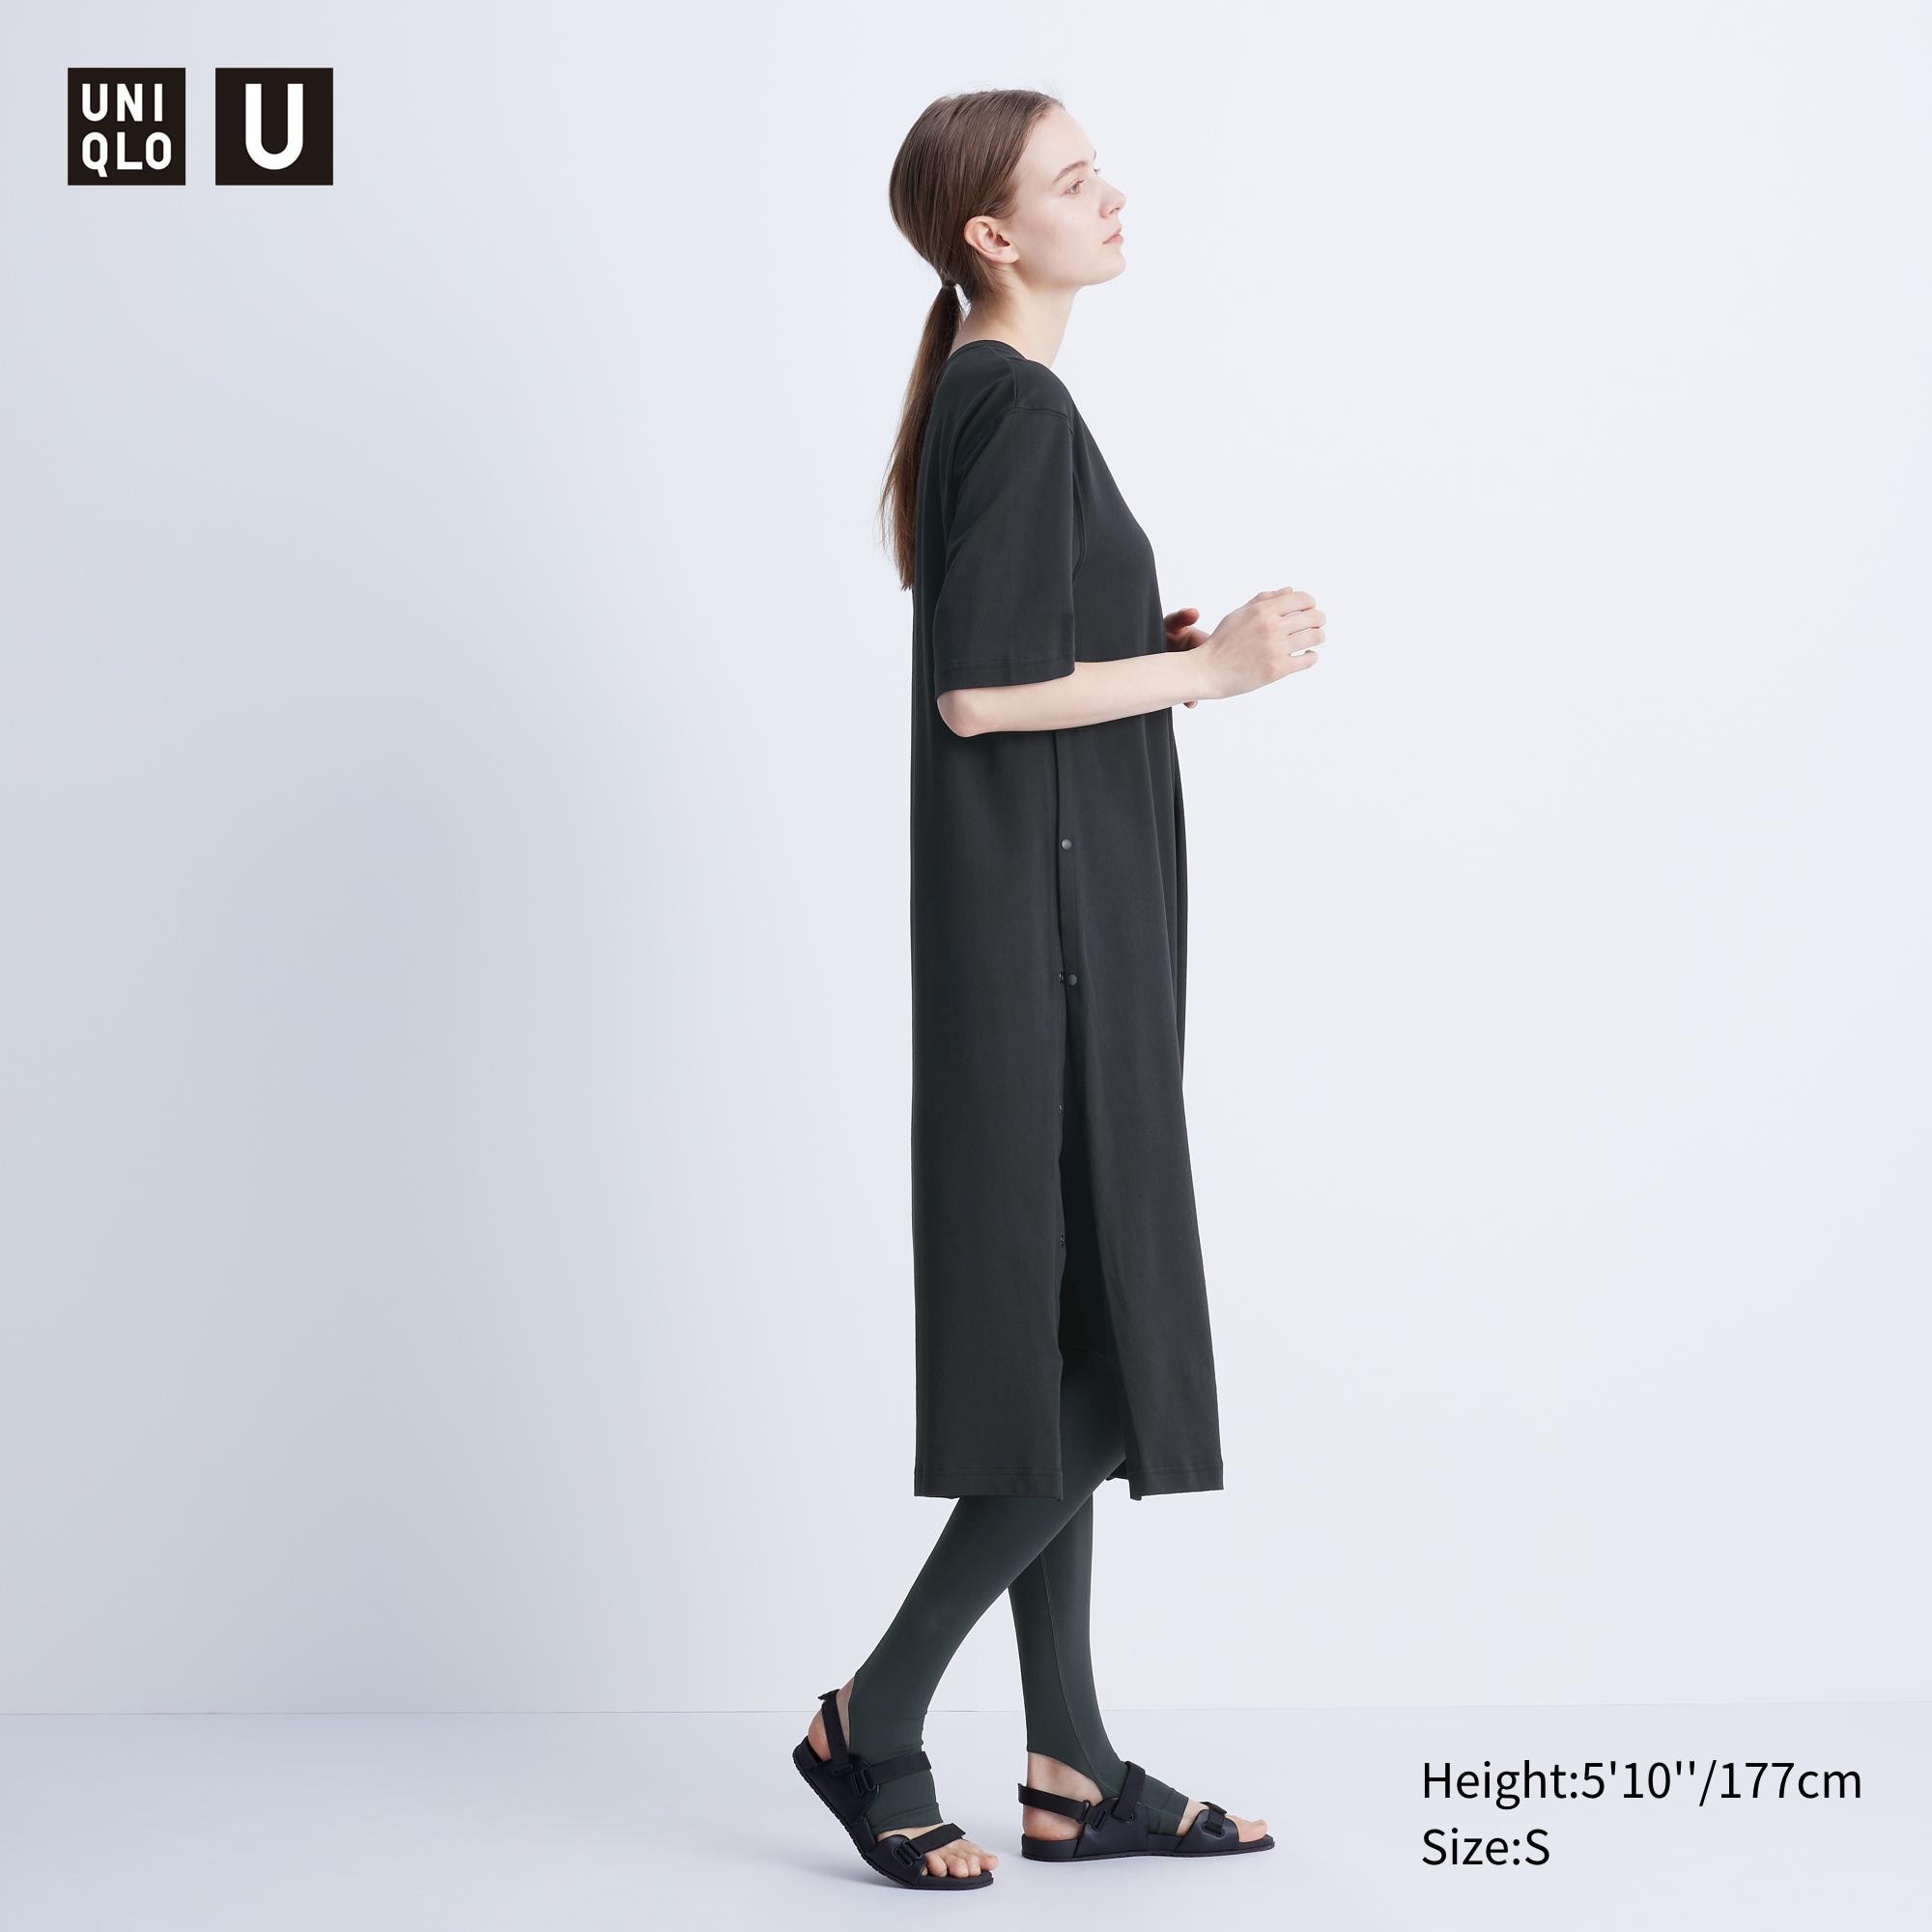 UNIQLO CREPE COTTON LOOSE SNAPPED SHORT SLEEVE T-DRESS | Square One